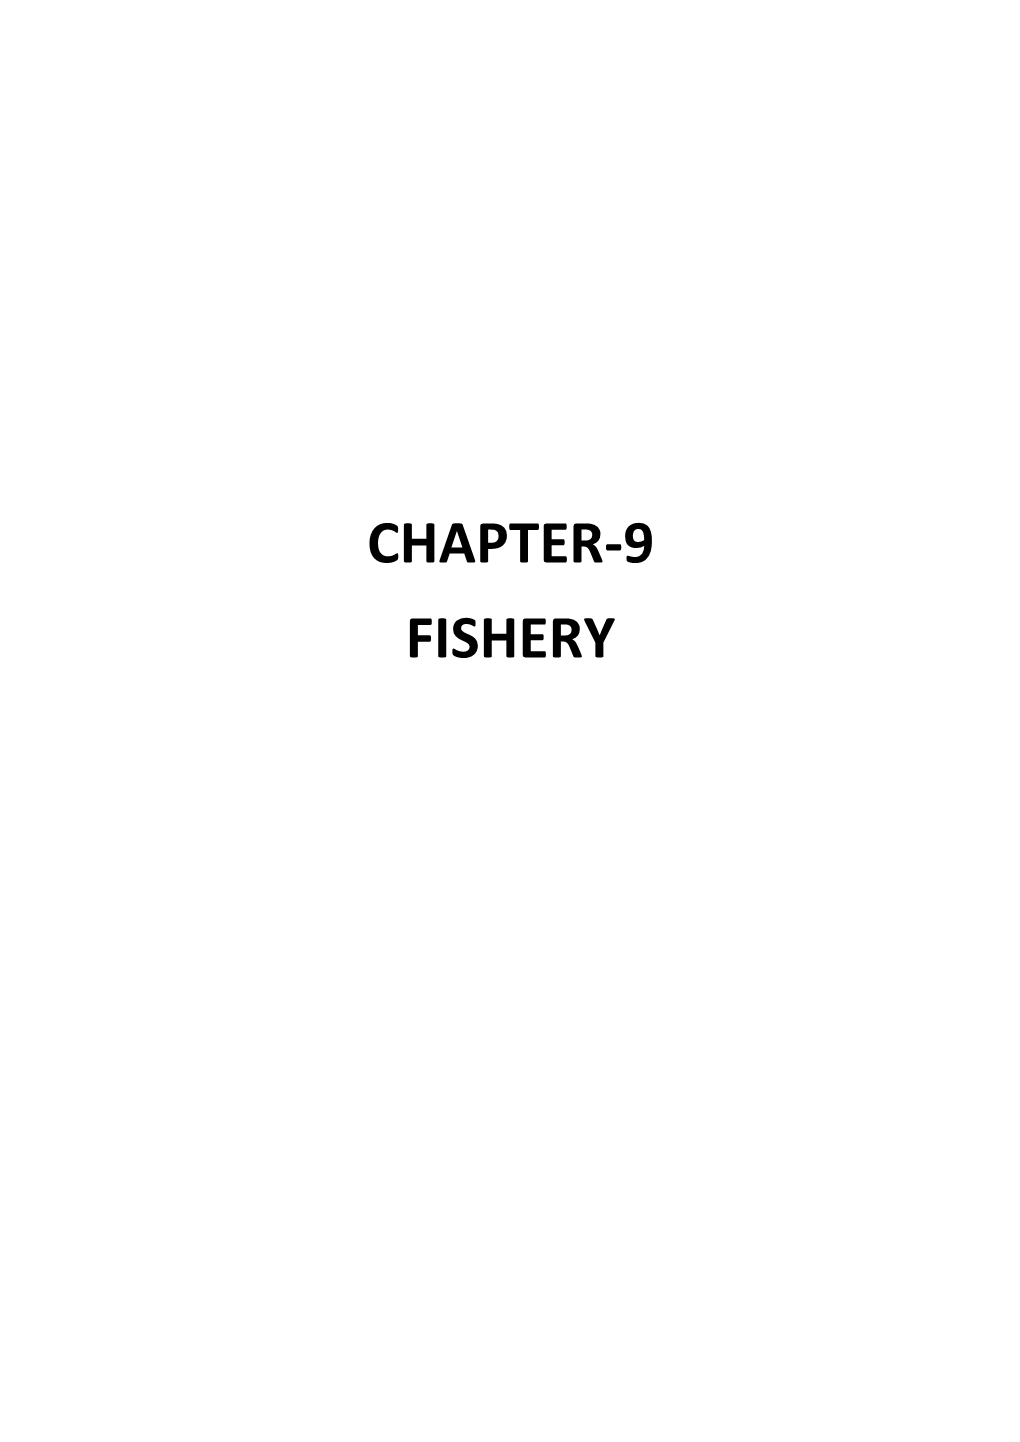 Chapter-9 Fishery